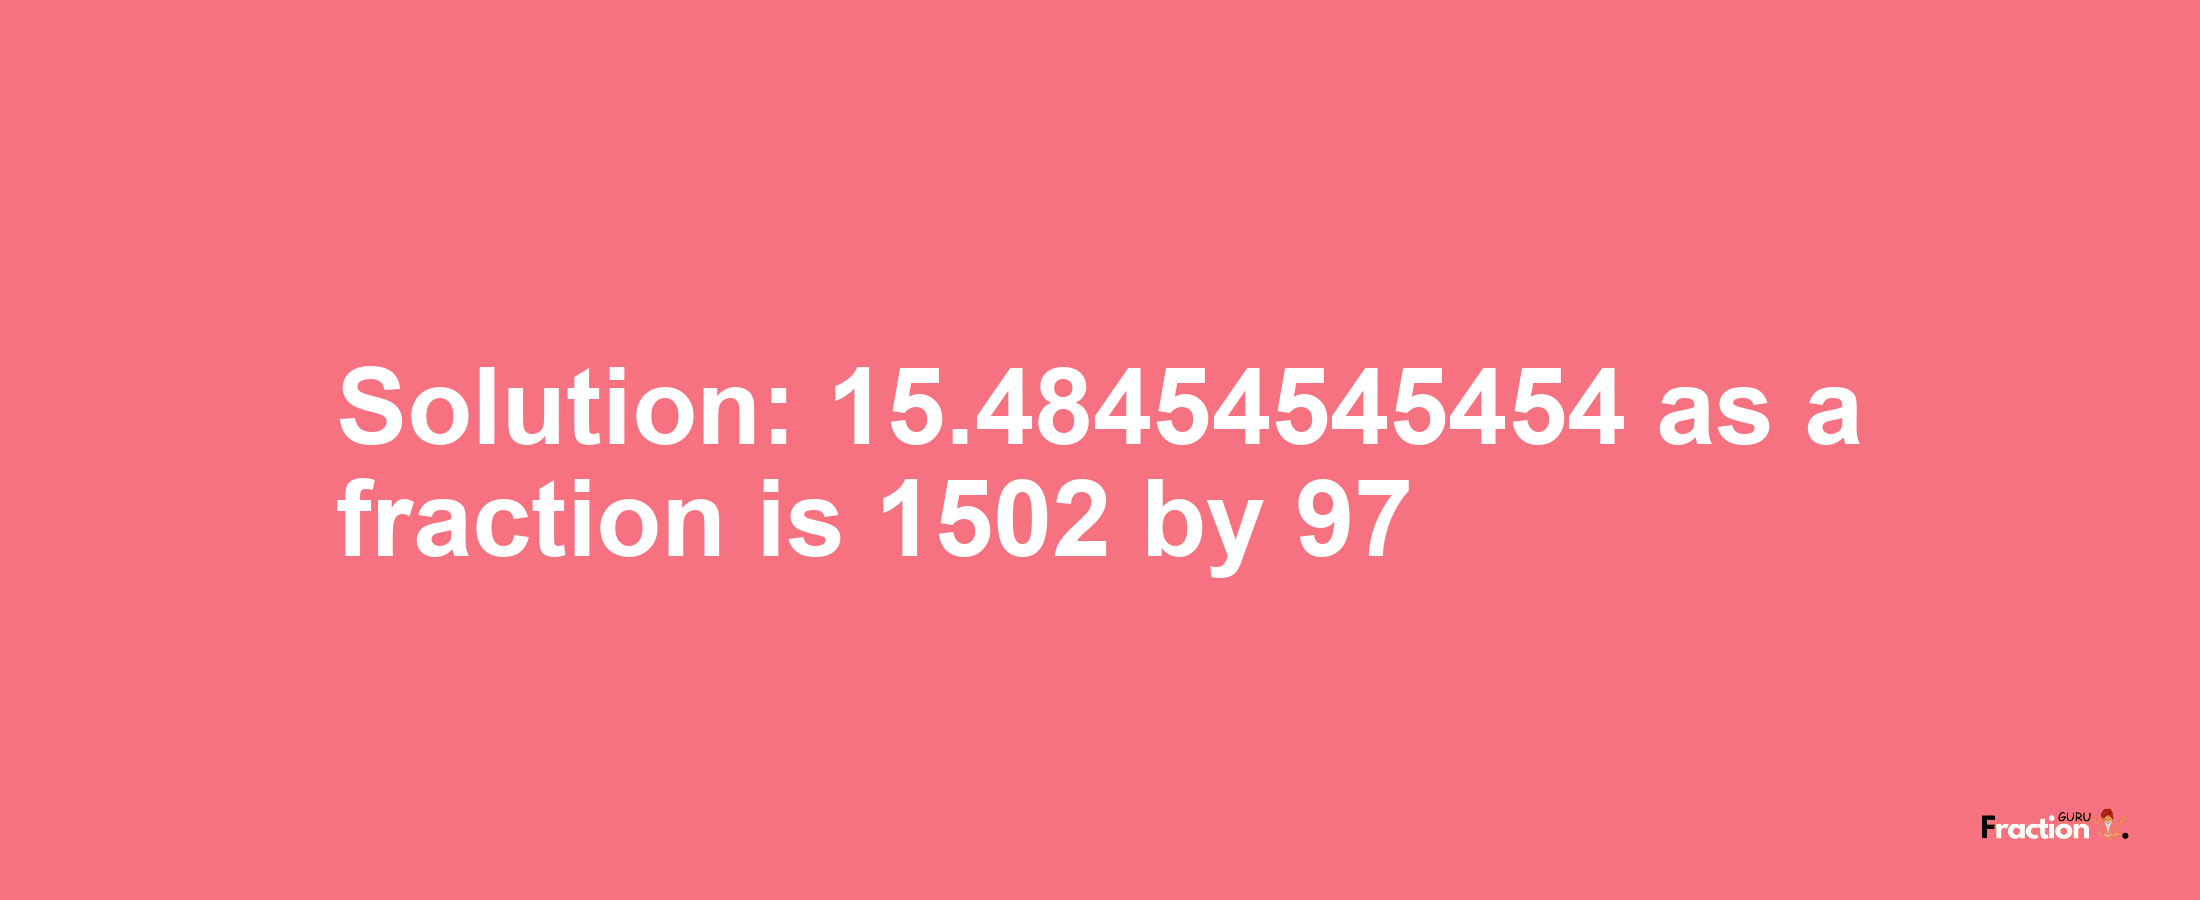 Solution:15.48454545454 as a fraction is 1502/97